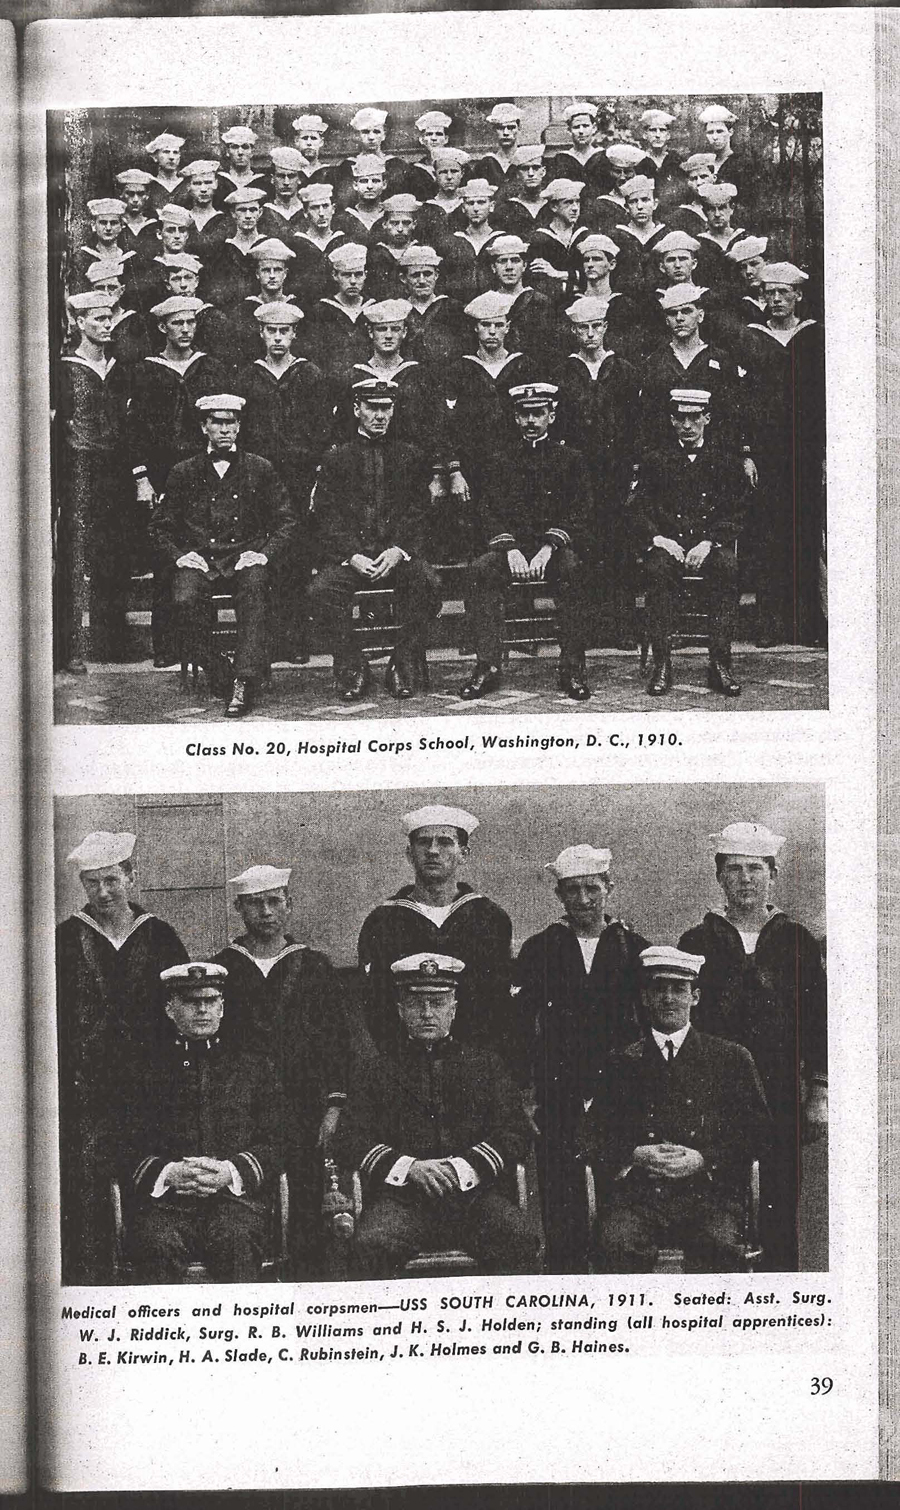 Development of Service Instruction (Naval Hospital Corps Training School) Page 39